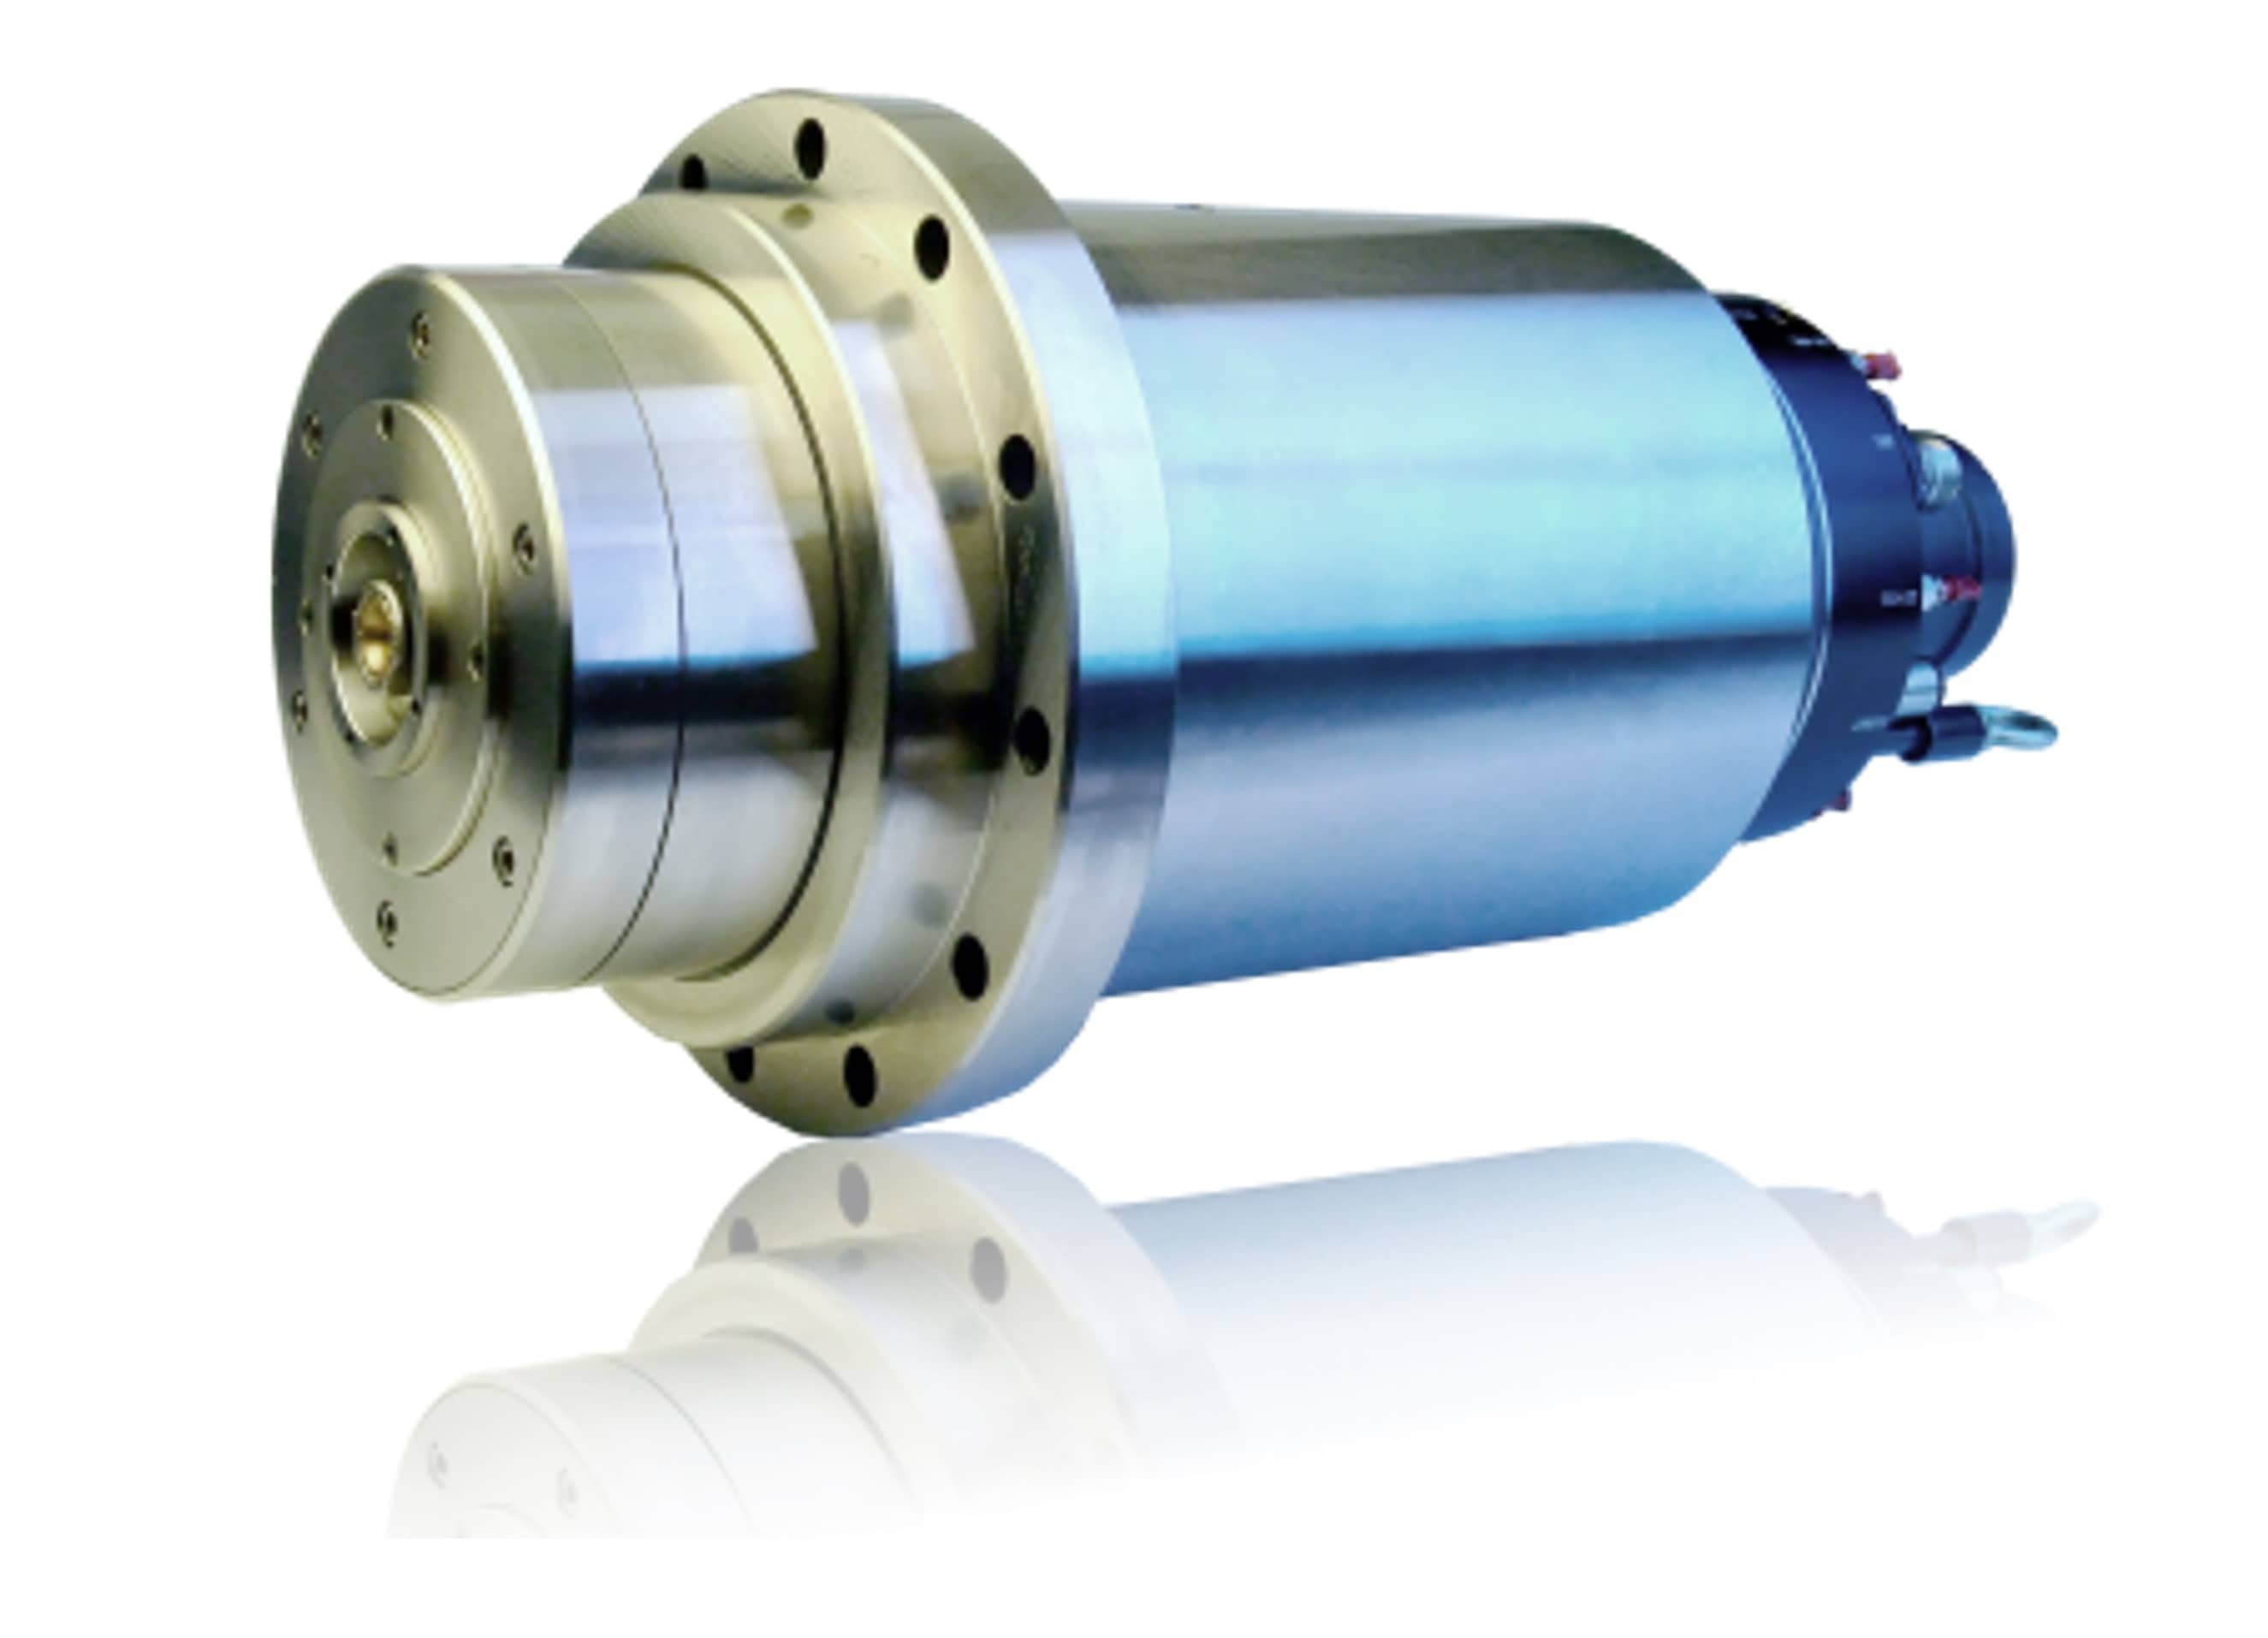 Products|SY-210B Built-in motor spindle(HSK-A63)